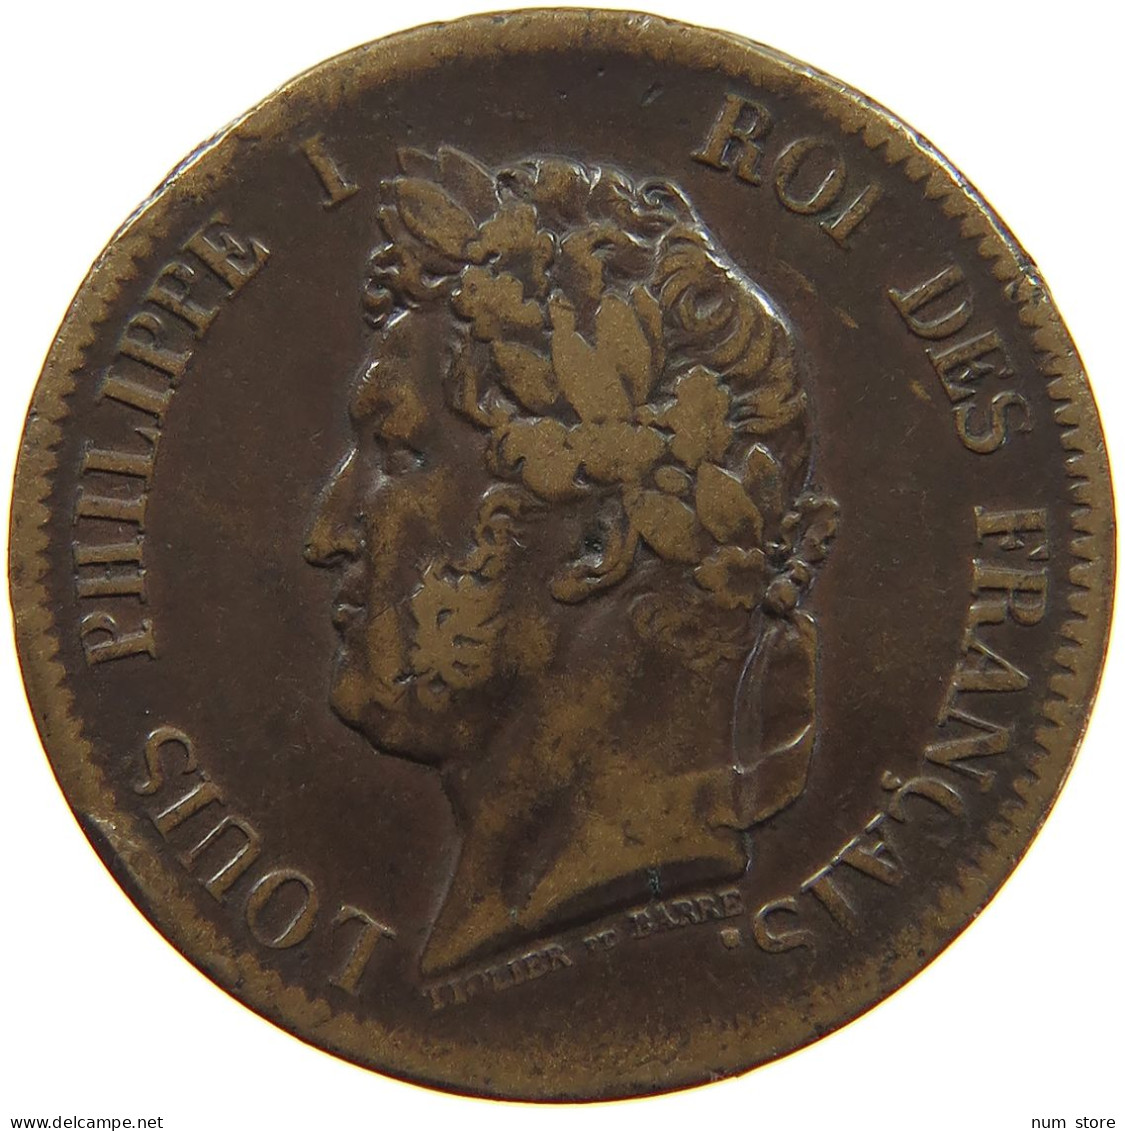 FRENCH COLONIES 5 CENTIMES 1843 A LOUIS PHILIPPE I. (1830-1848) #c061 0071 - Colonie Francesi (1817-1844)